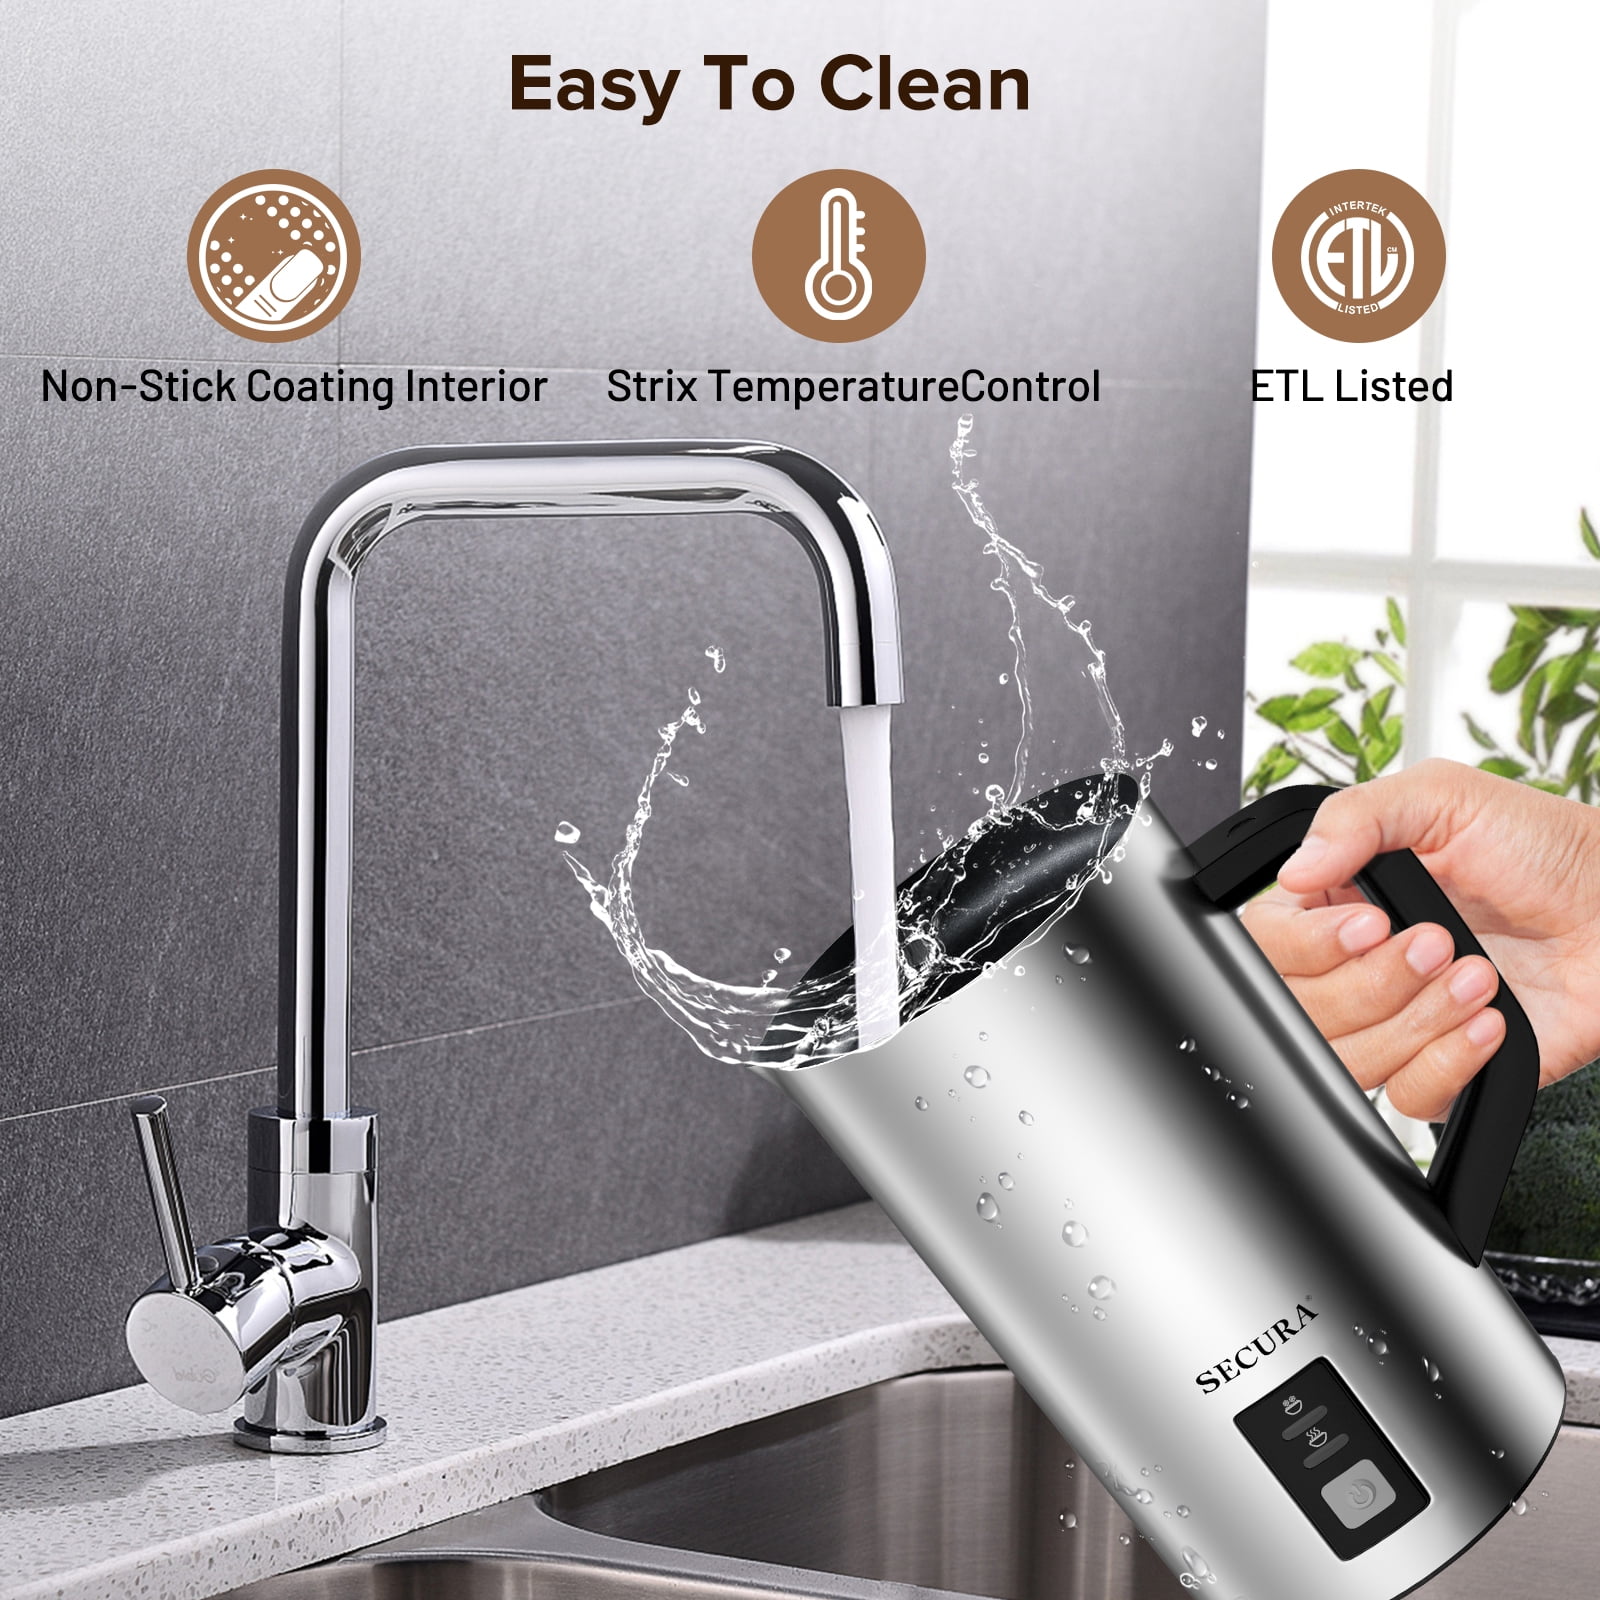  Secura Automatic Milk Frother, 4-in-1 Electric Milk Steamer,  17oz Detachable Hot/Cold Foam Maker, Milk Warmer & 2 Whisks & Detachable Milk  Frother, 17oz Electric Milk Steamer Stainless Steel: Home & Kitchen